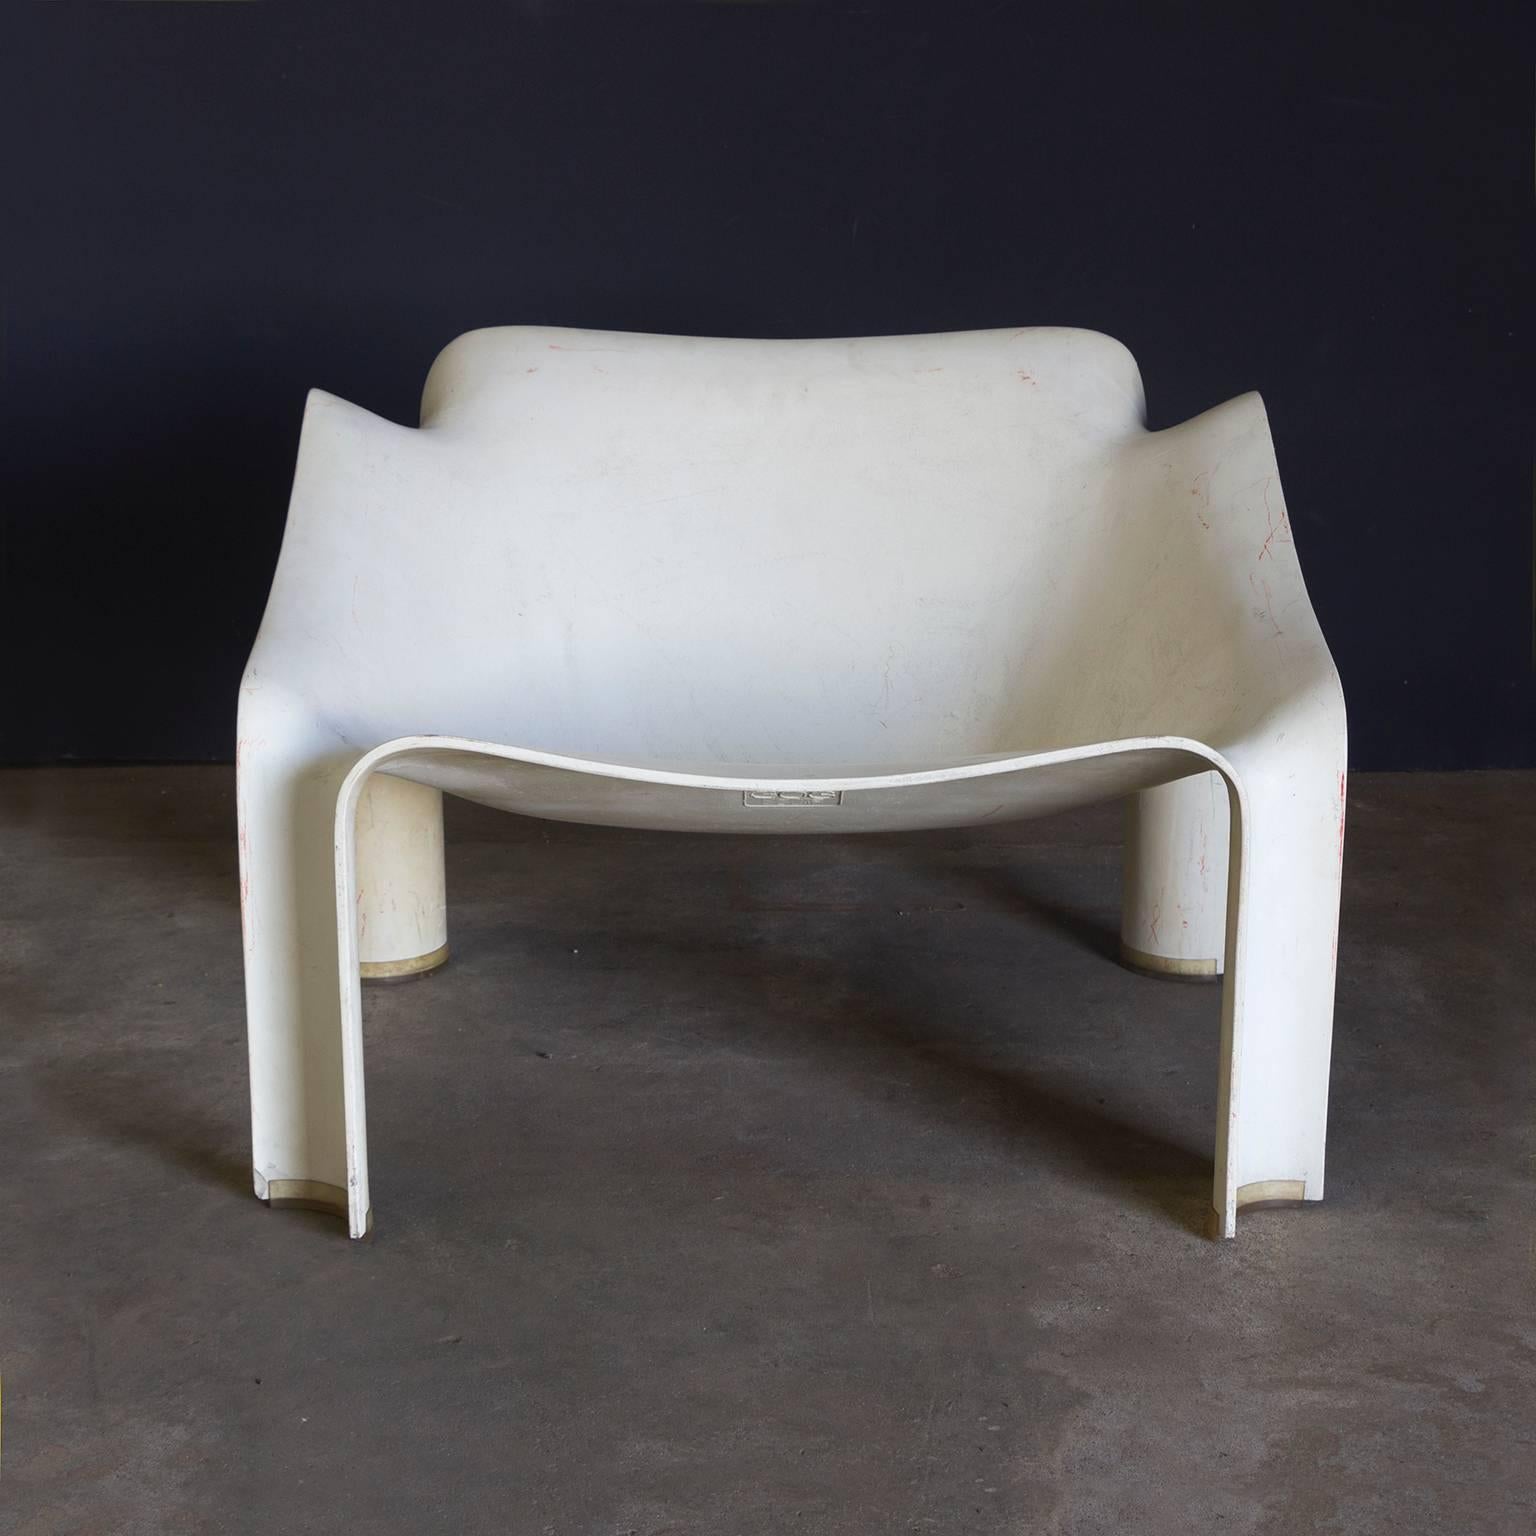 Dutch 1963, Pierre Paulin, Early F303 Lounge Chair in Cream / White for Artifort